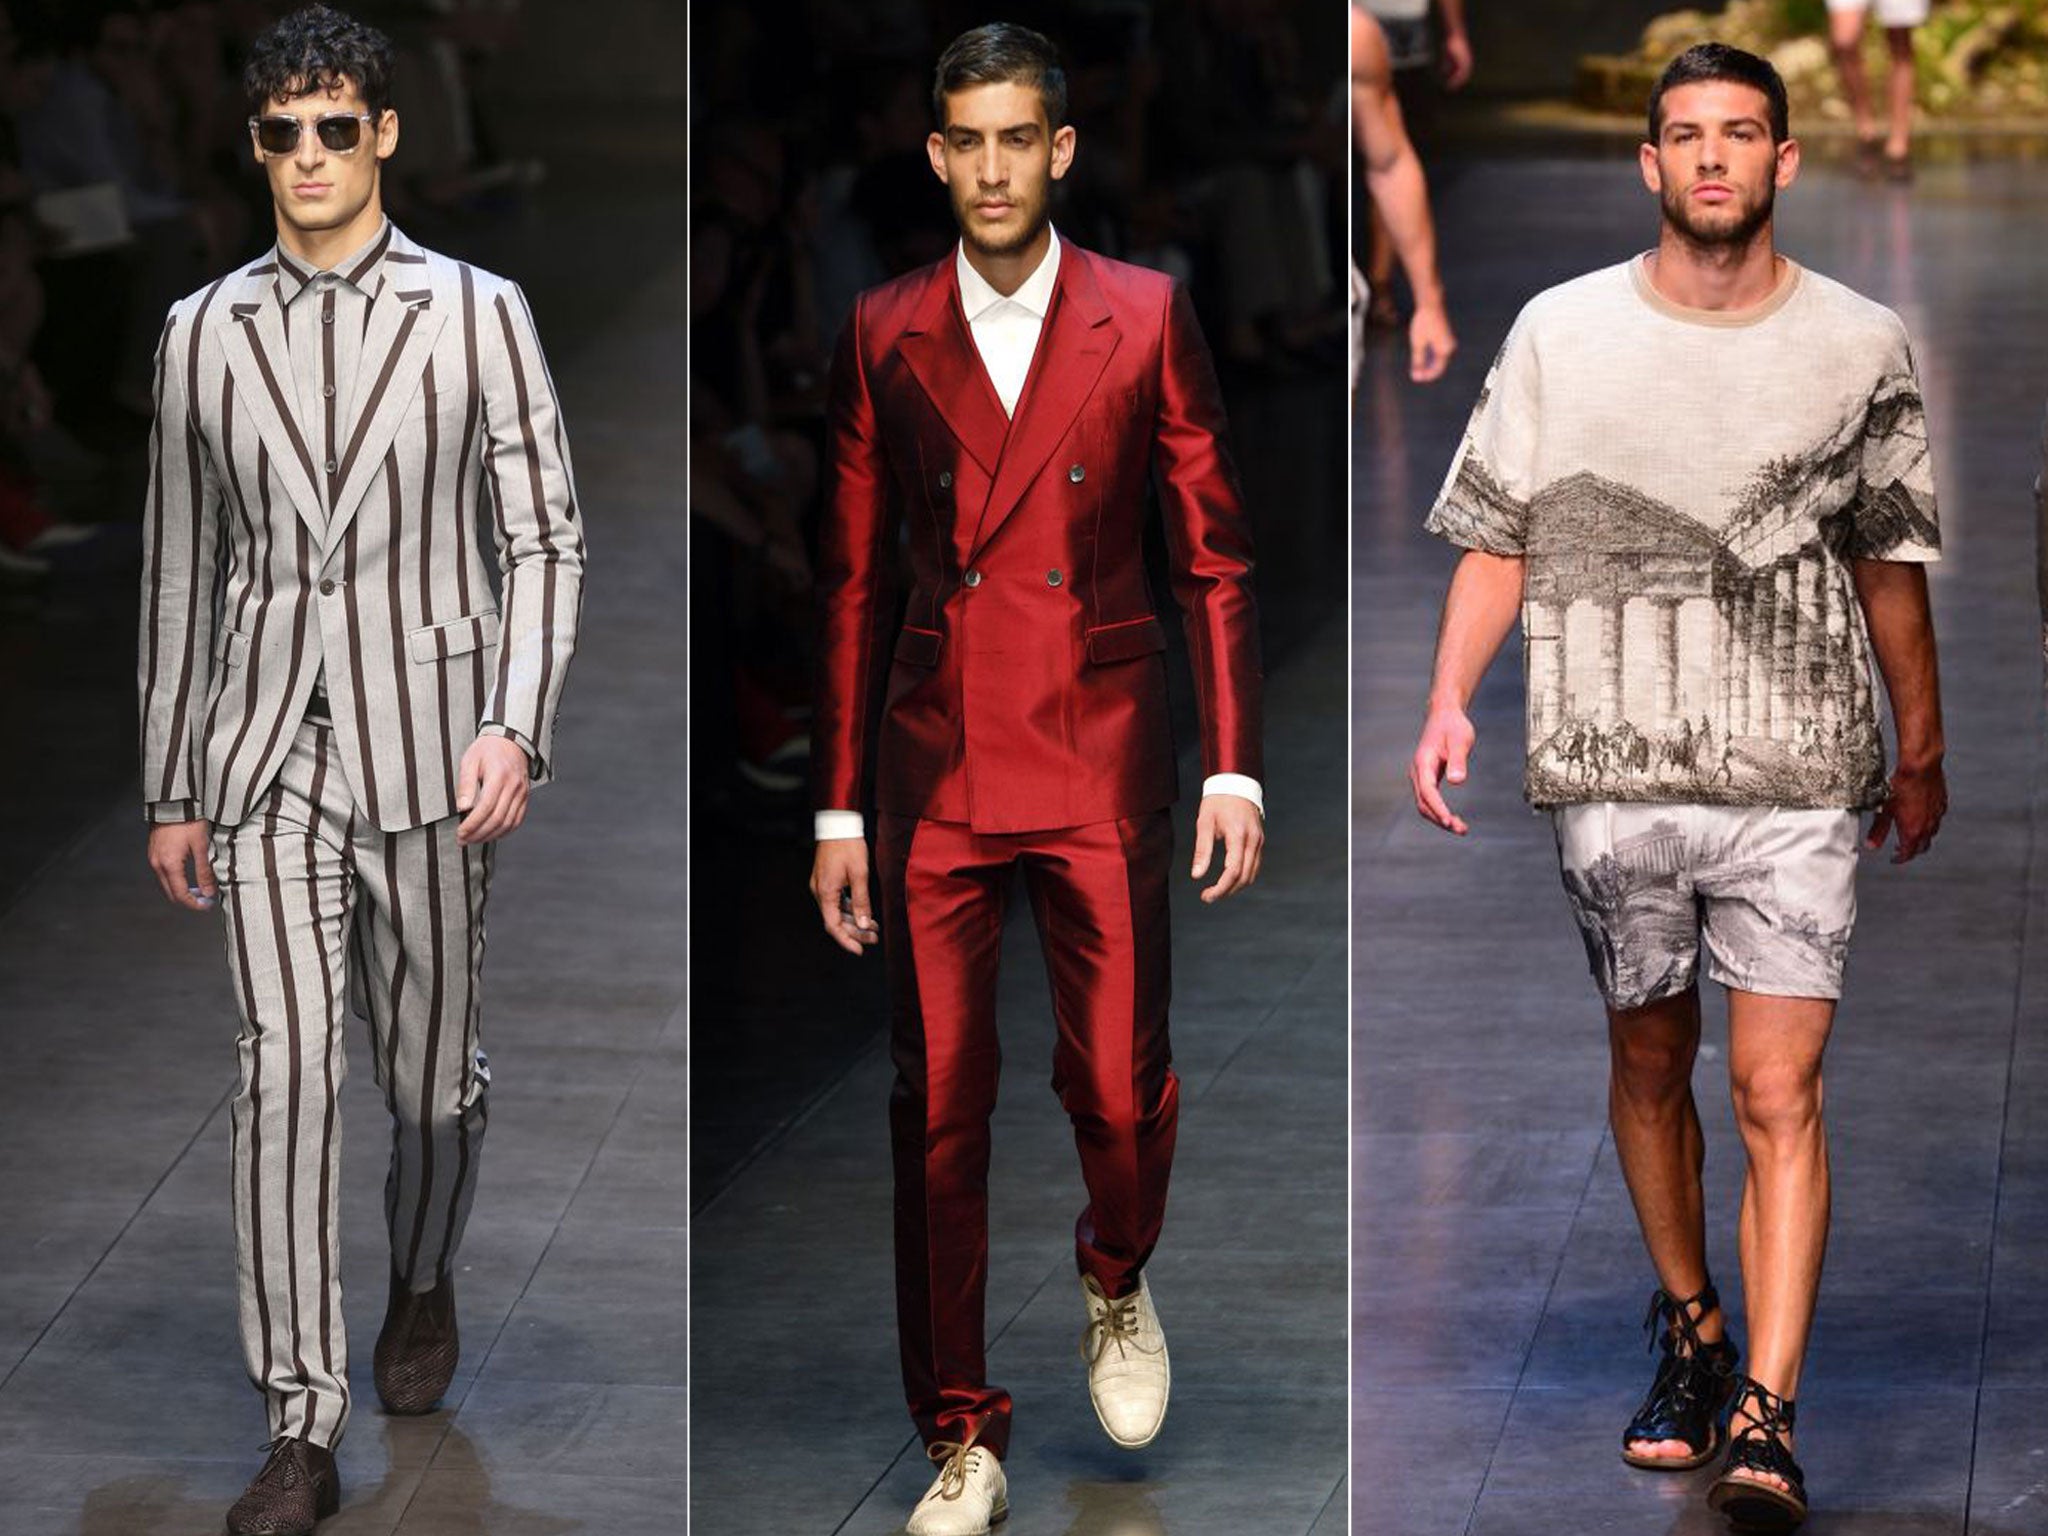 Dolce and Gabbana mined Sicilian mythology for inspiration. Plus, some eye-catching suits